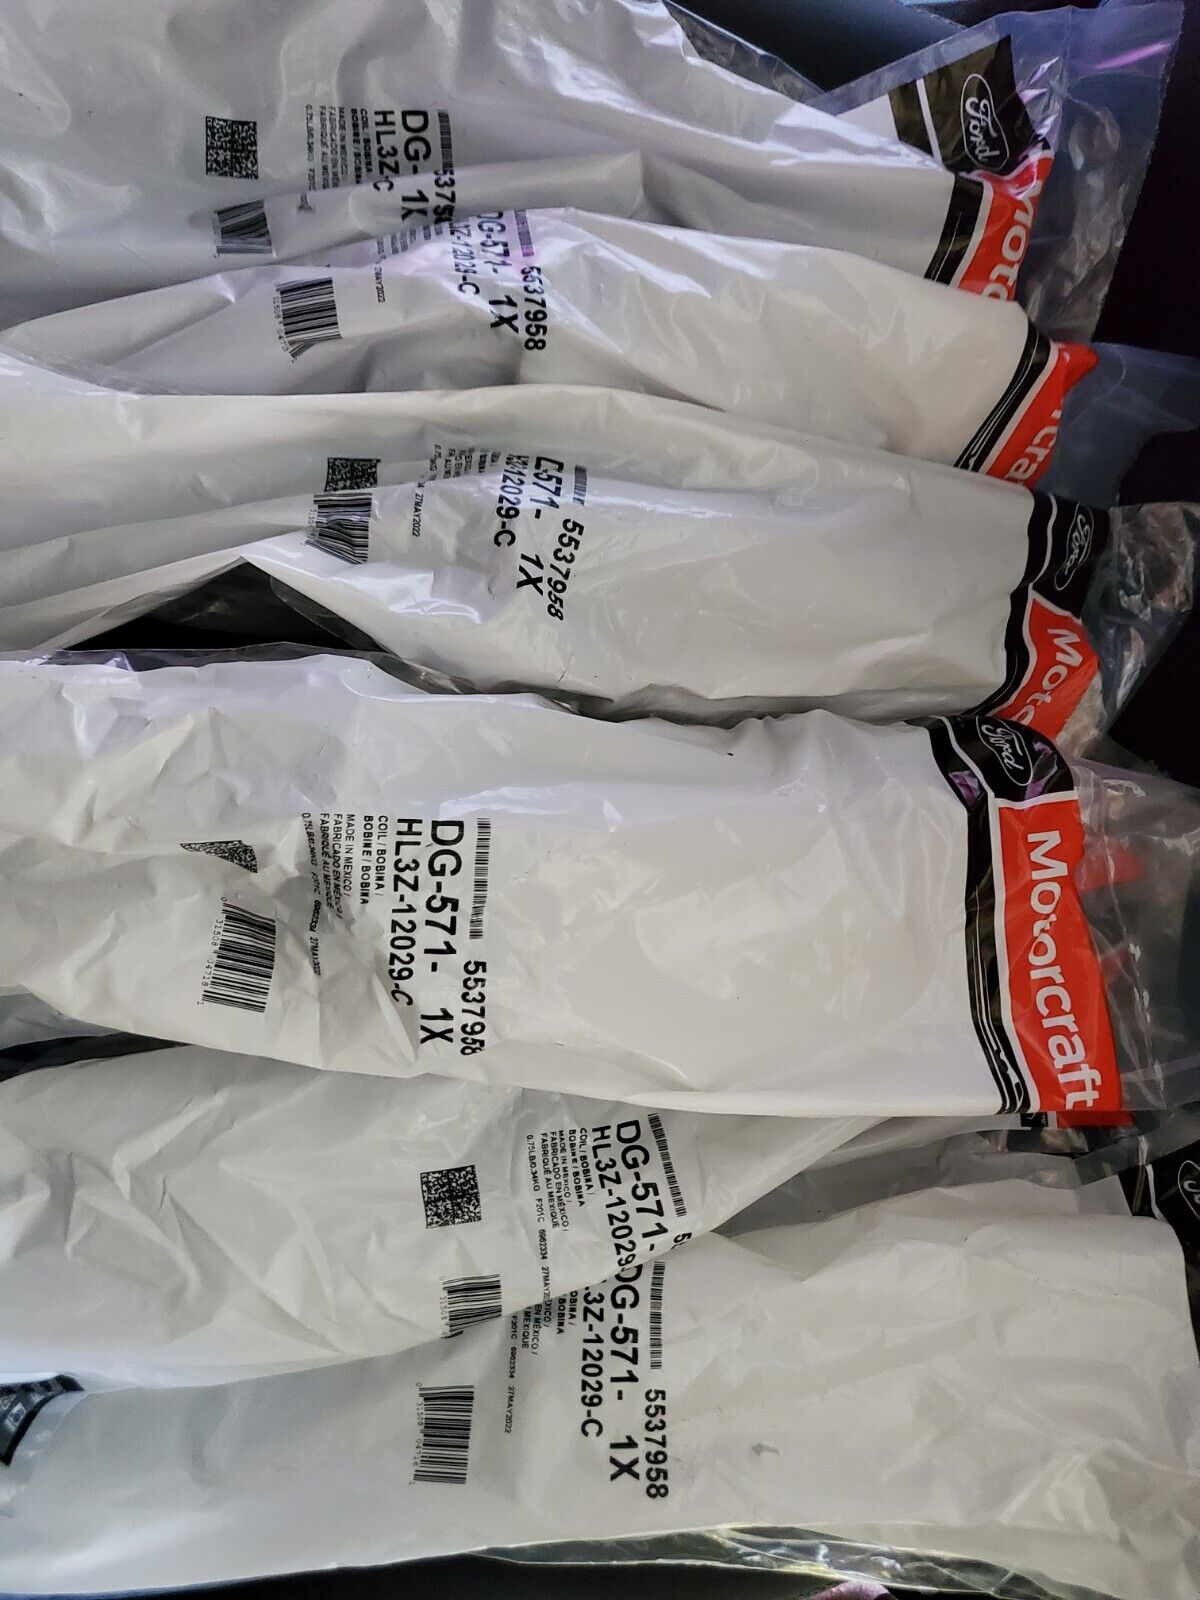 4 Dg570 And 4 BRAND NEW DG571 coils MOTORCRAFT IN FACTORY BAGS NEW STOCK